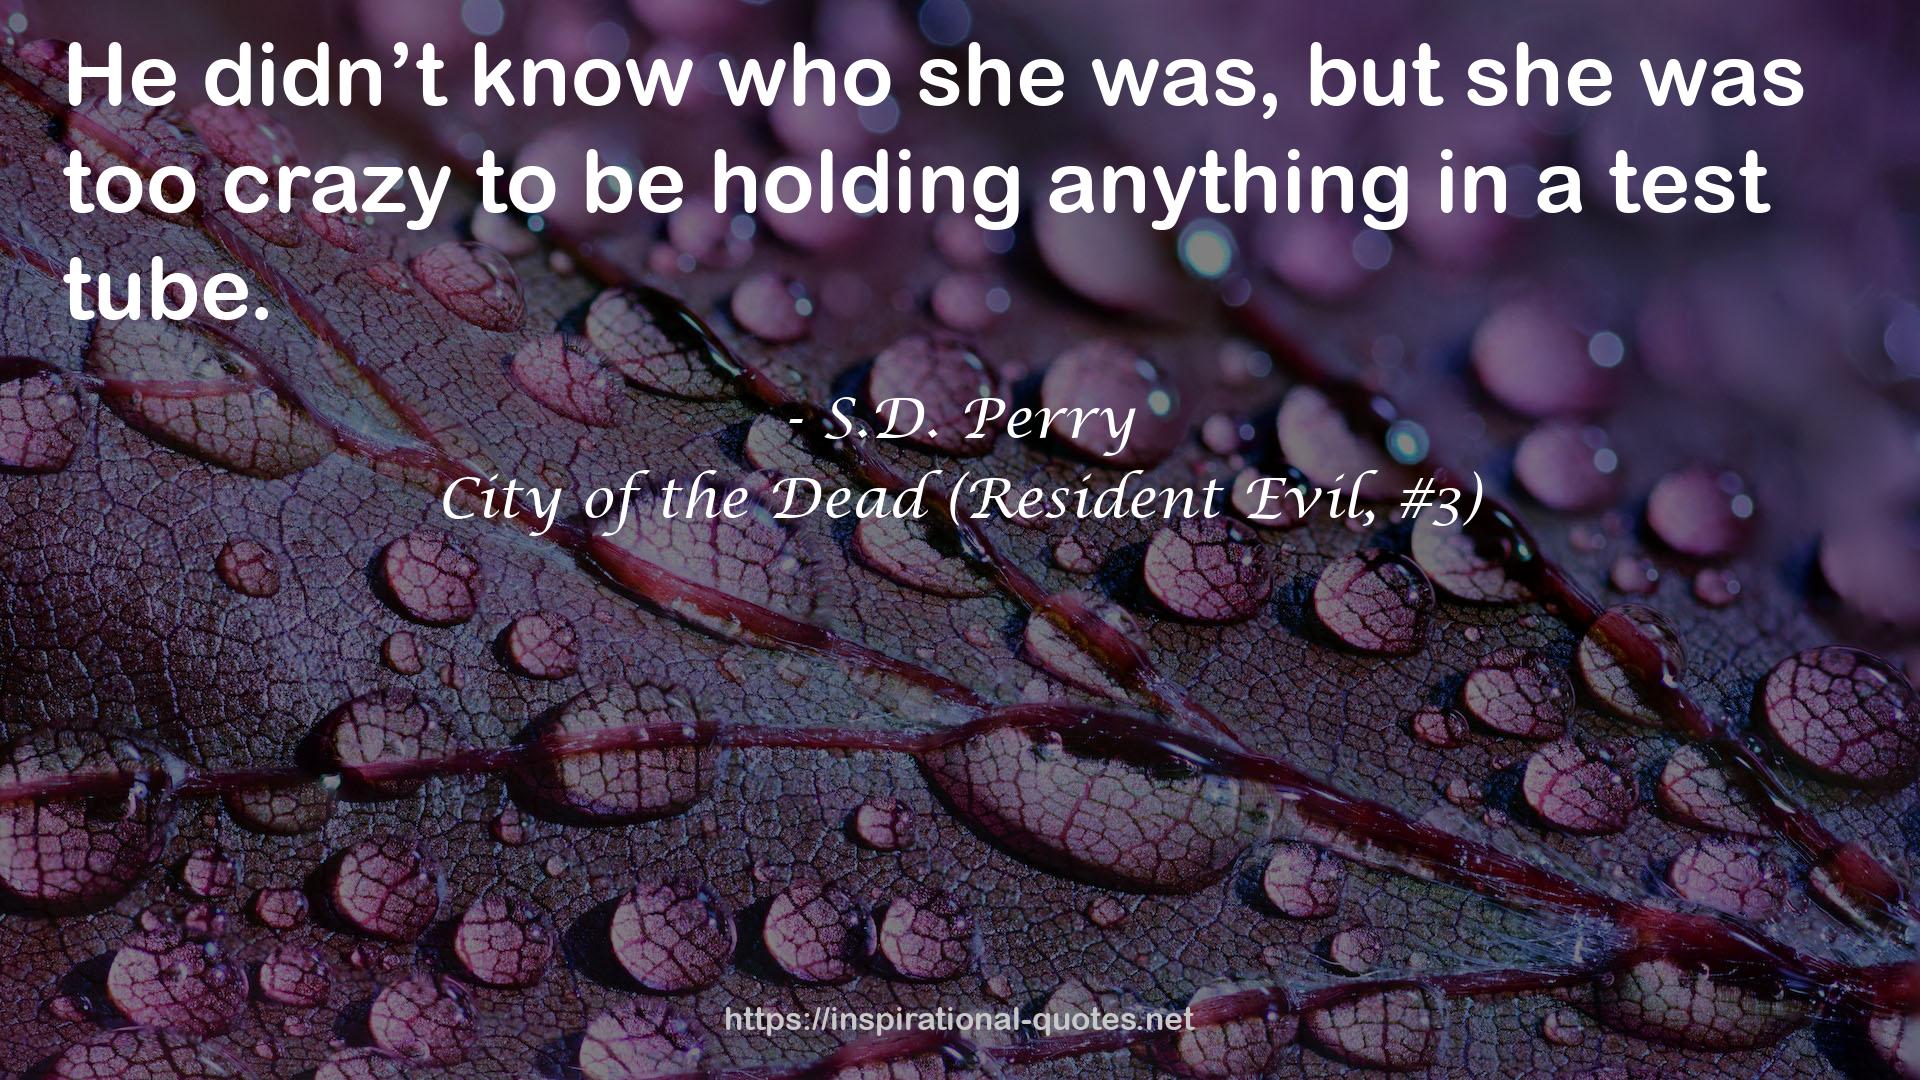 City of the Dead (Resident Evil, #3) QUOTES